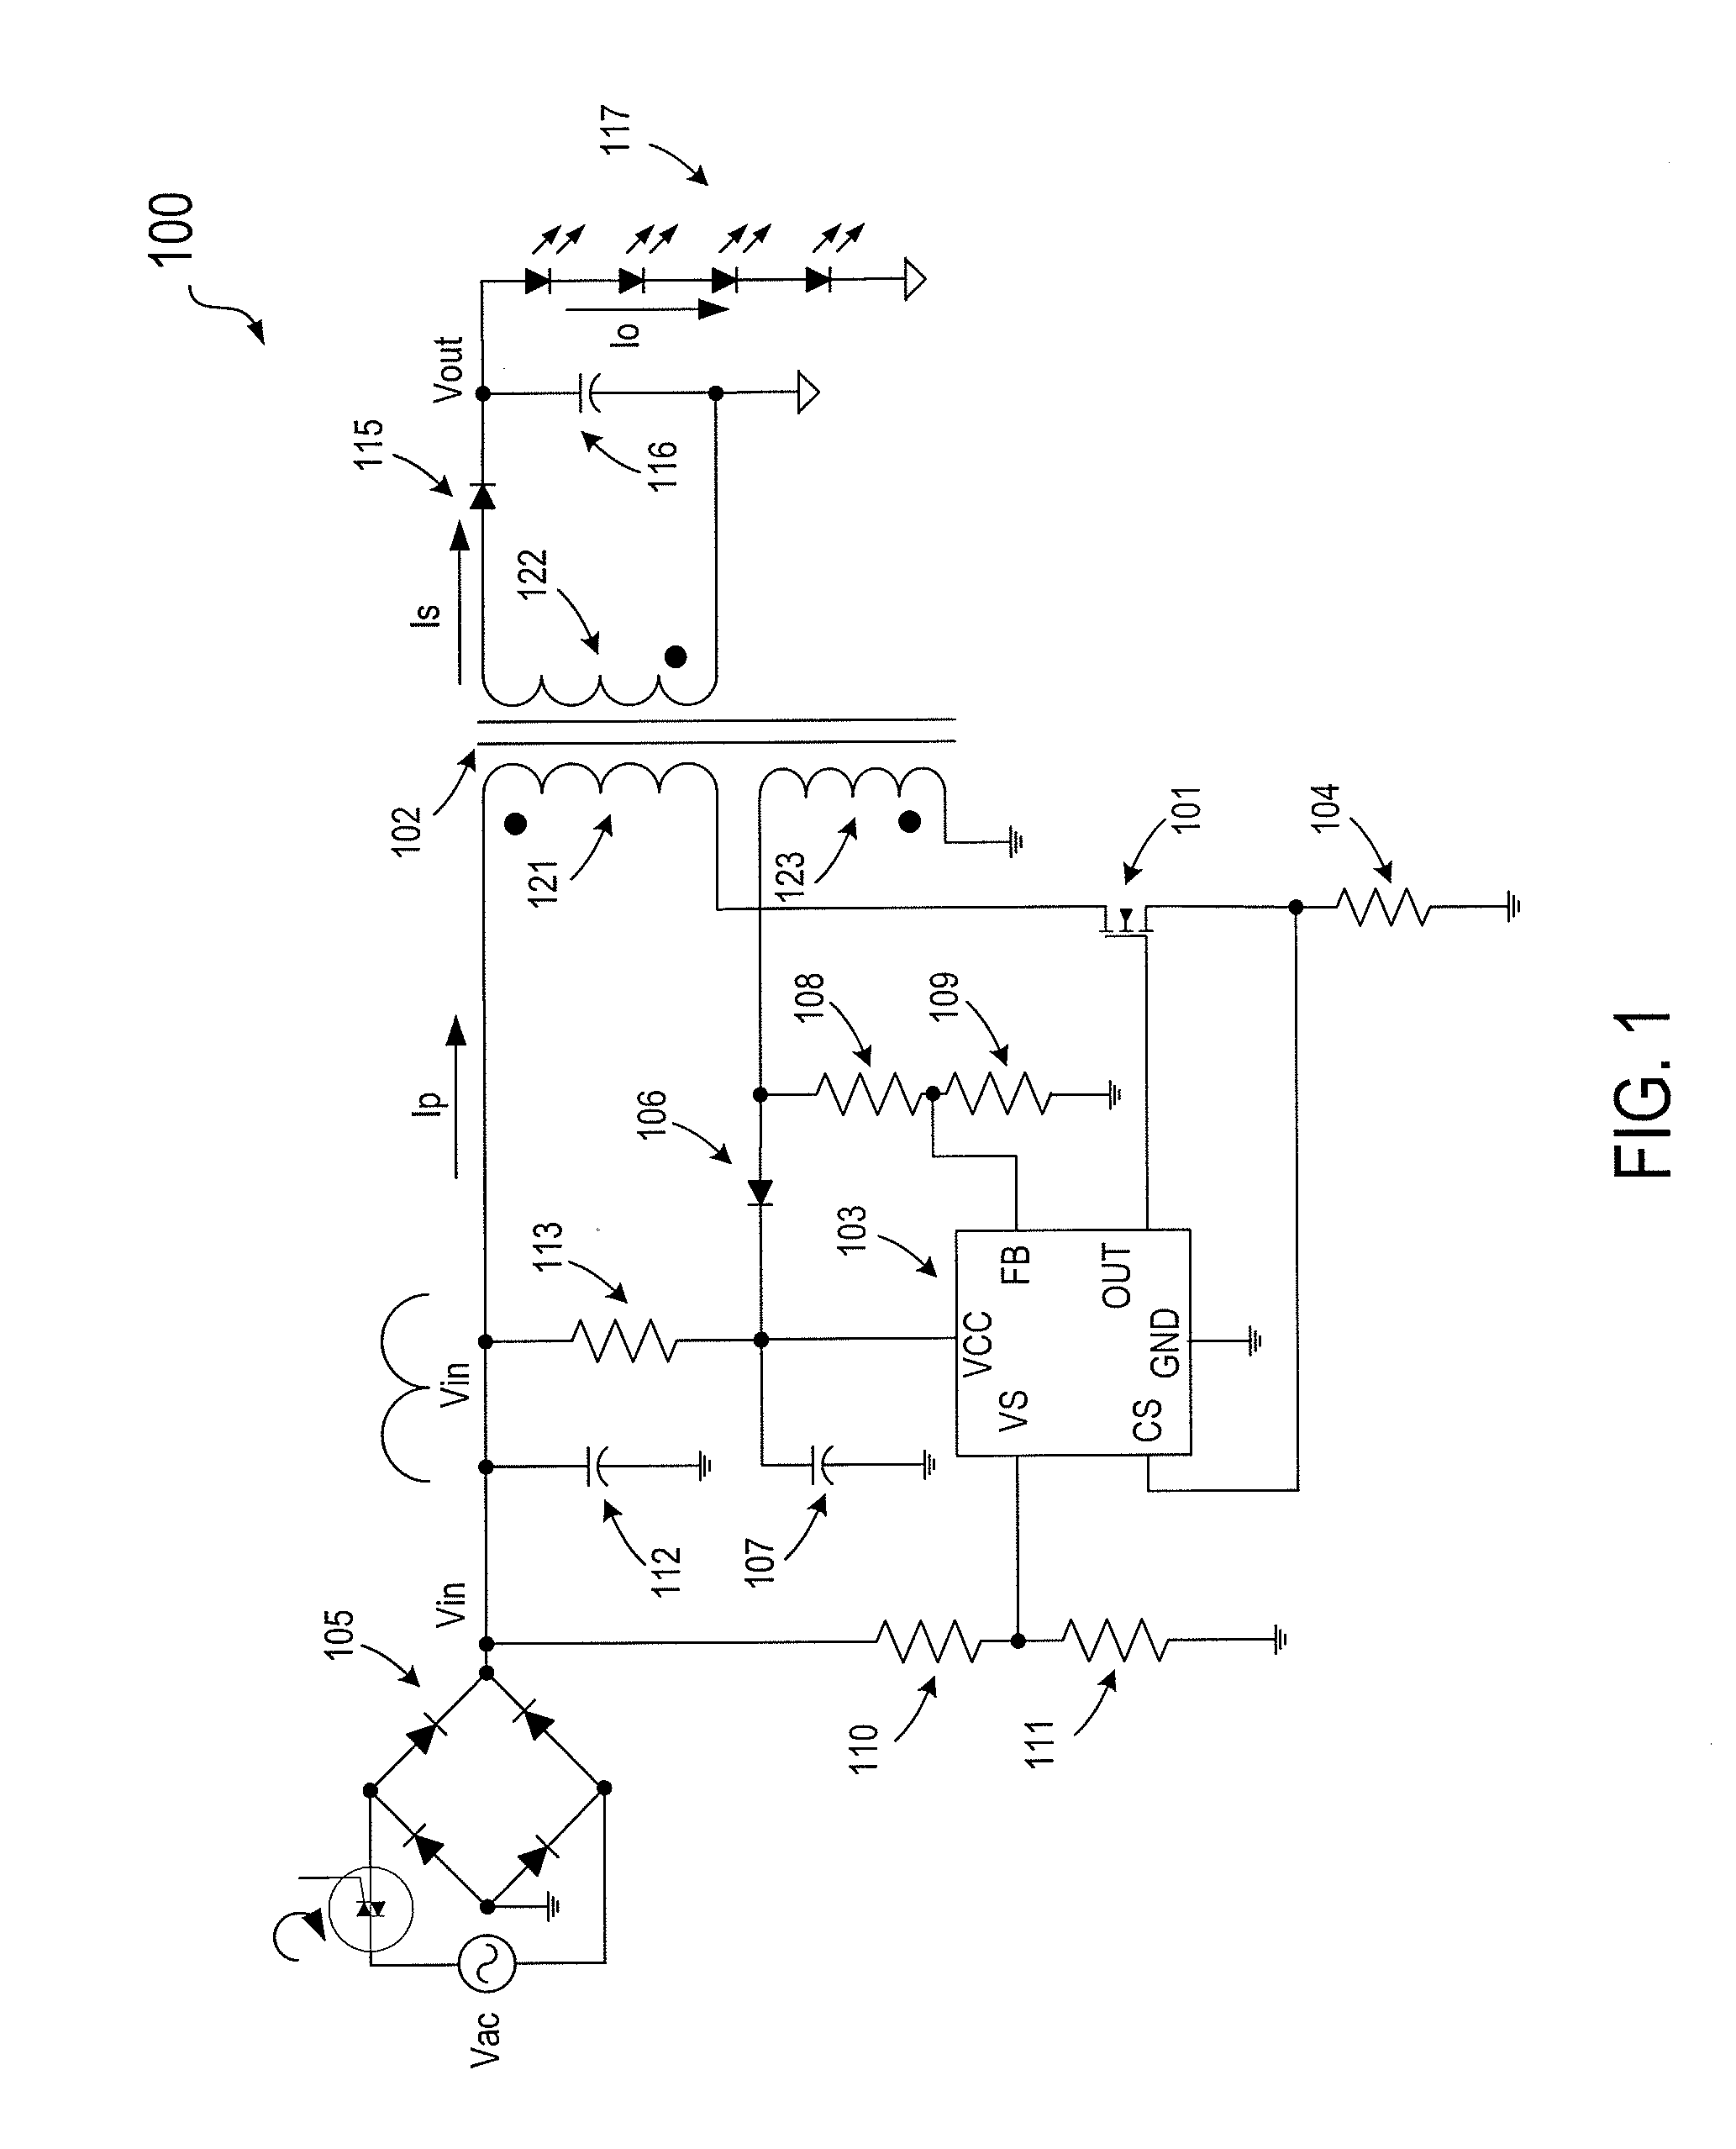 High power-factor control circuit and method for switched mode power supply